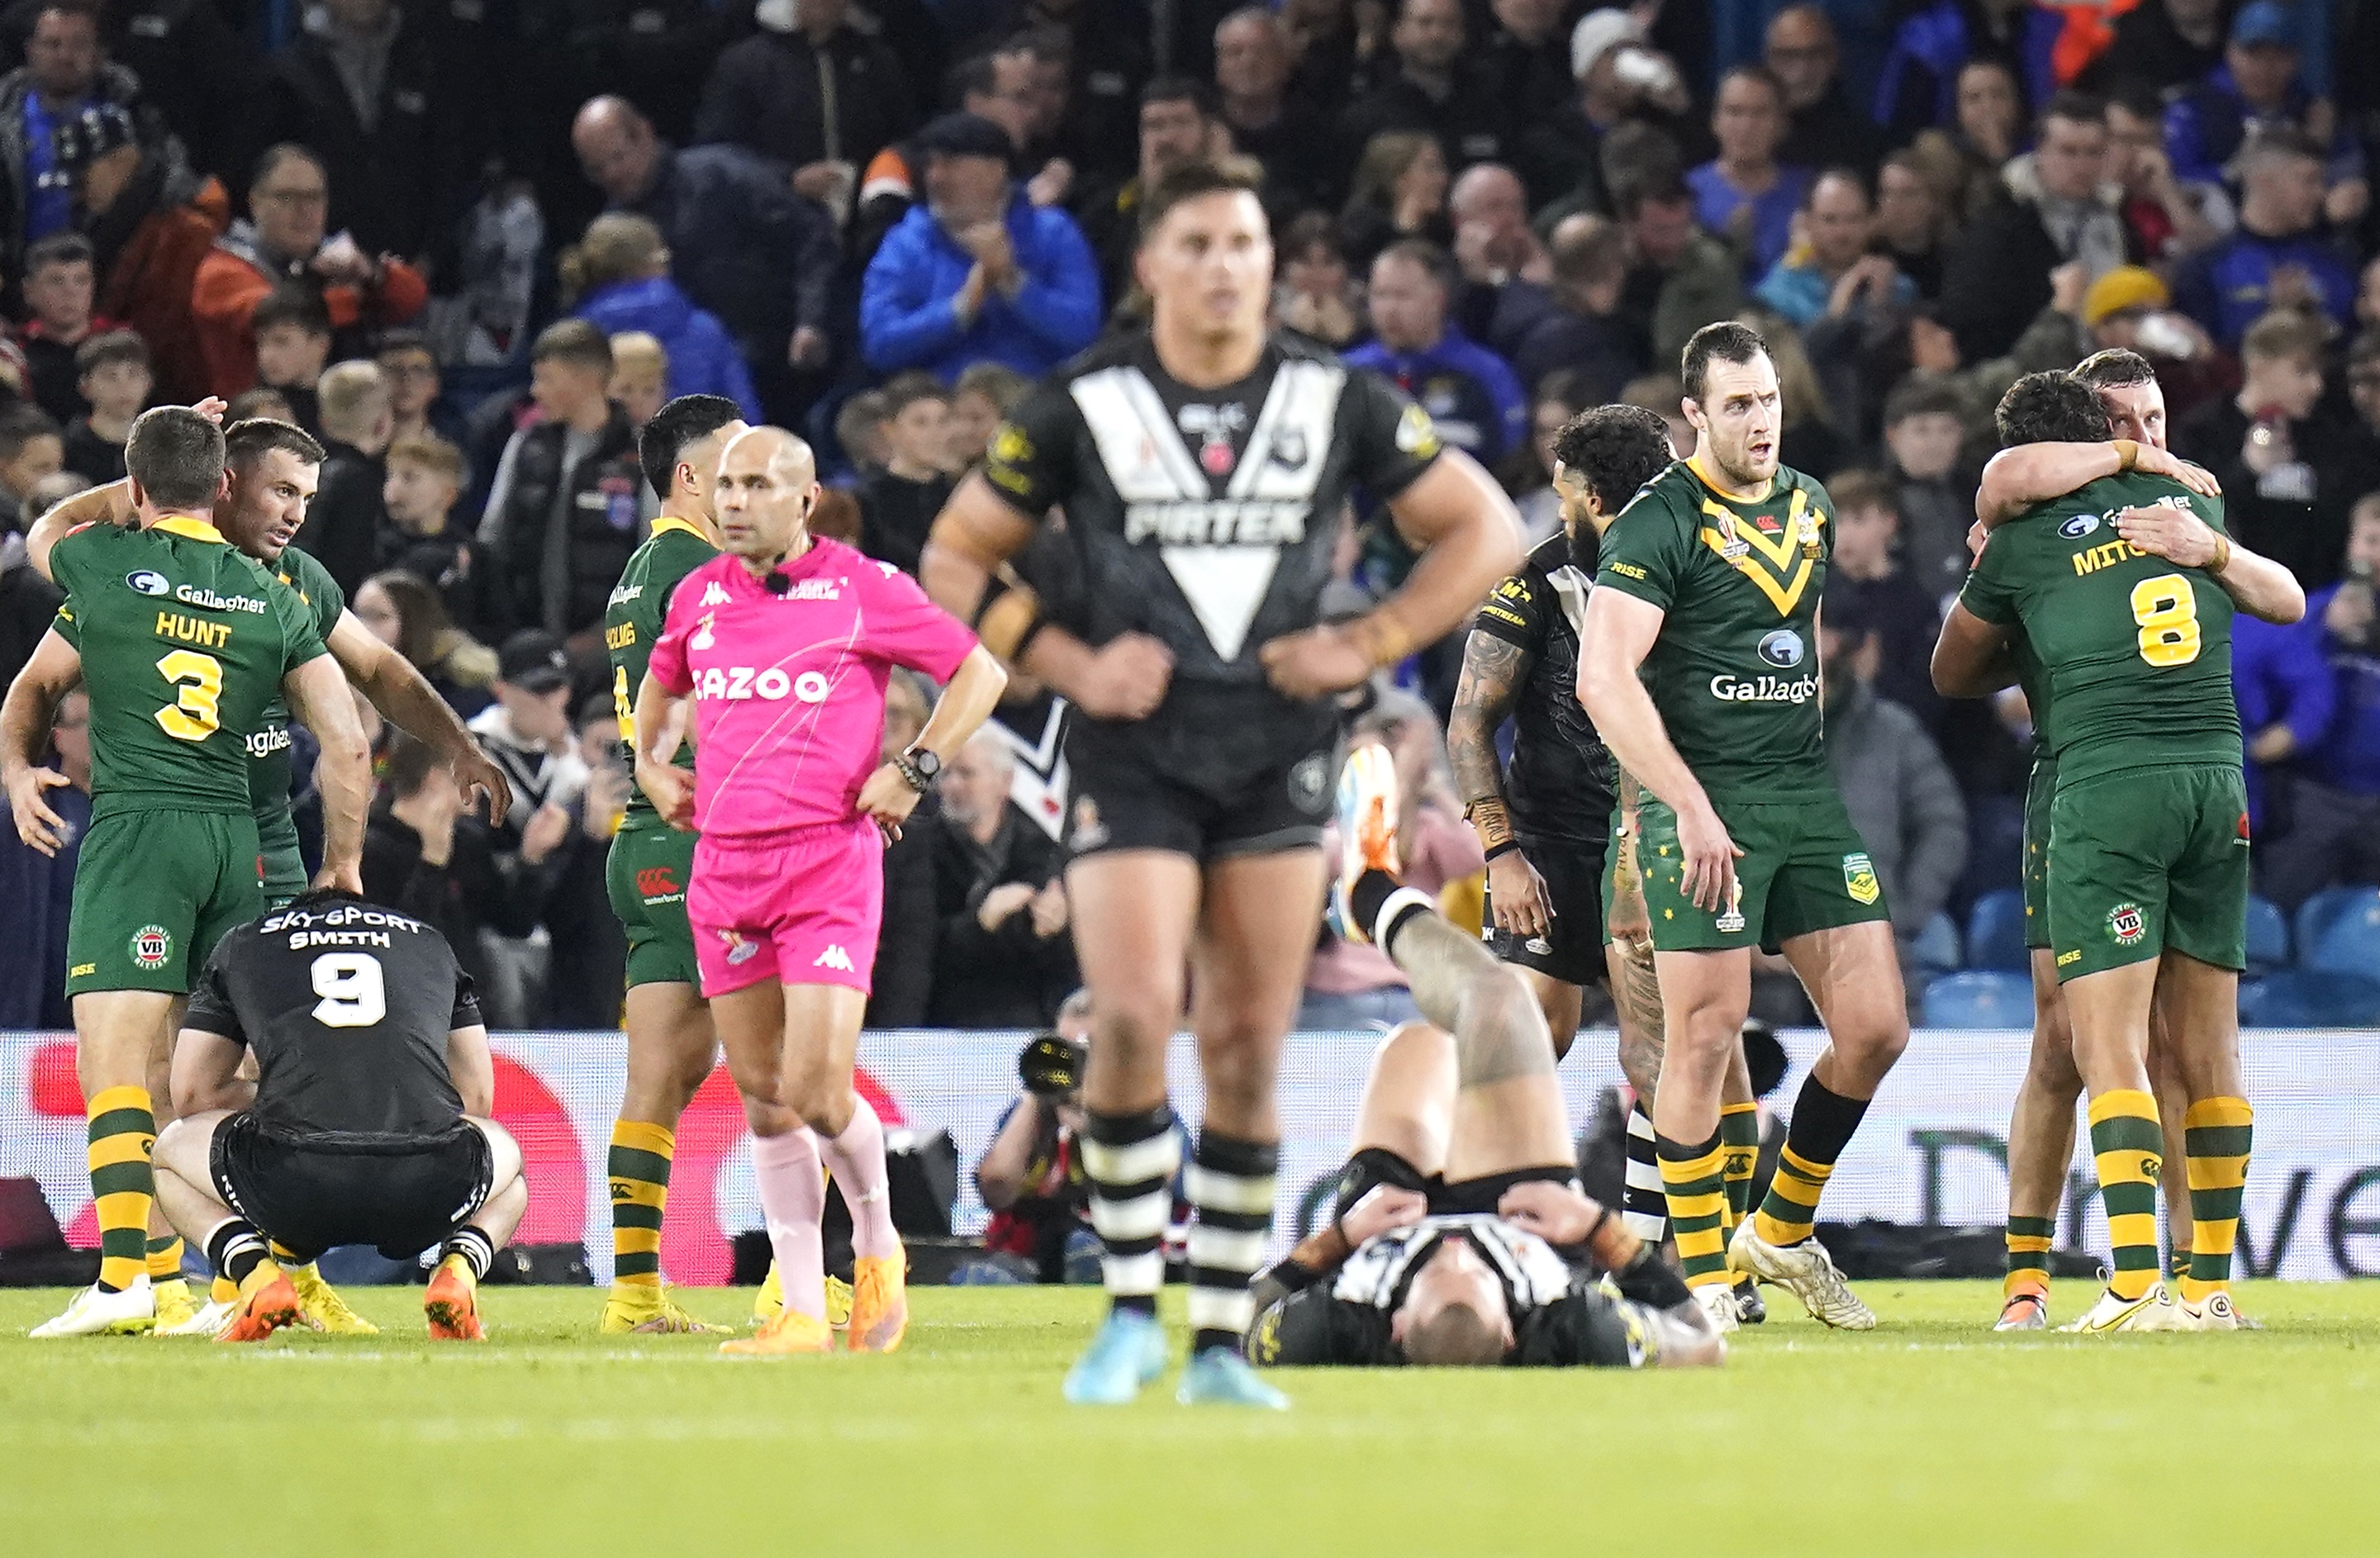 Rugby League World Cup Heartbreak for Kiwis as Australia win thrilling semifinal